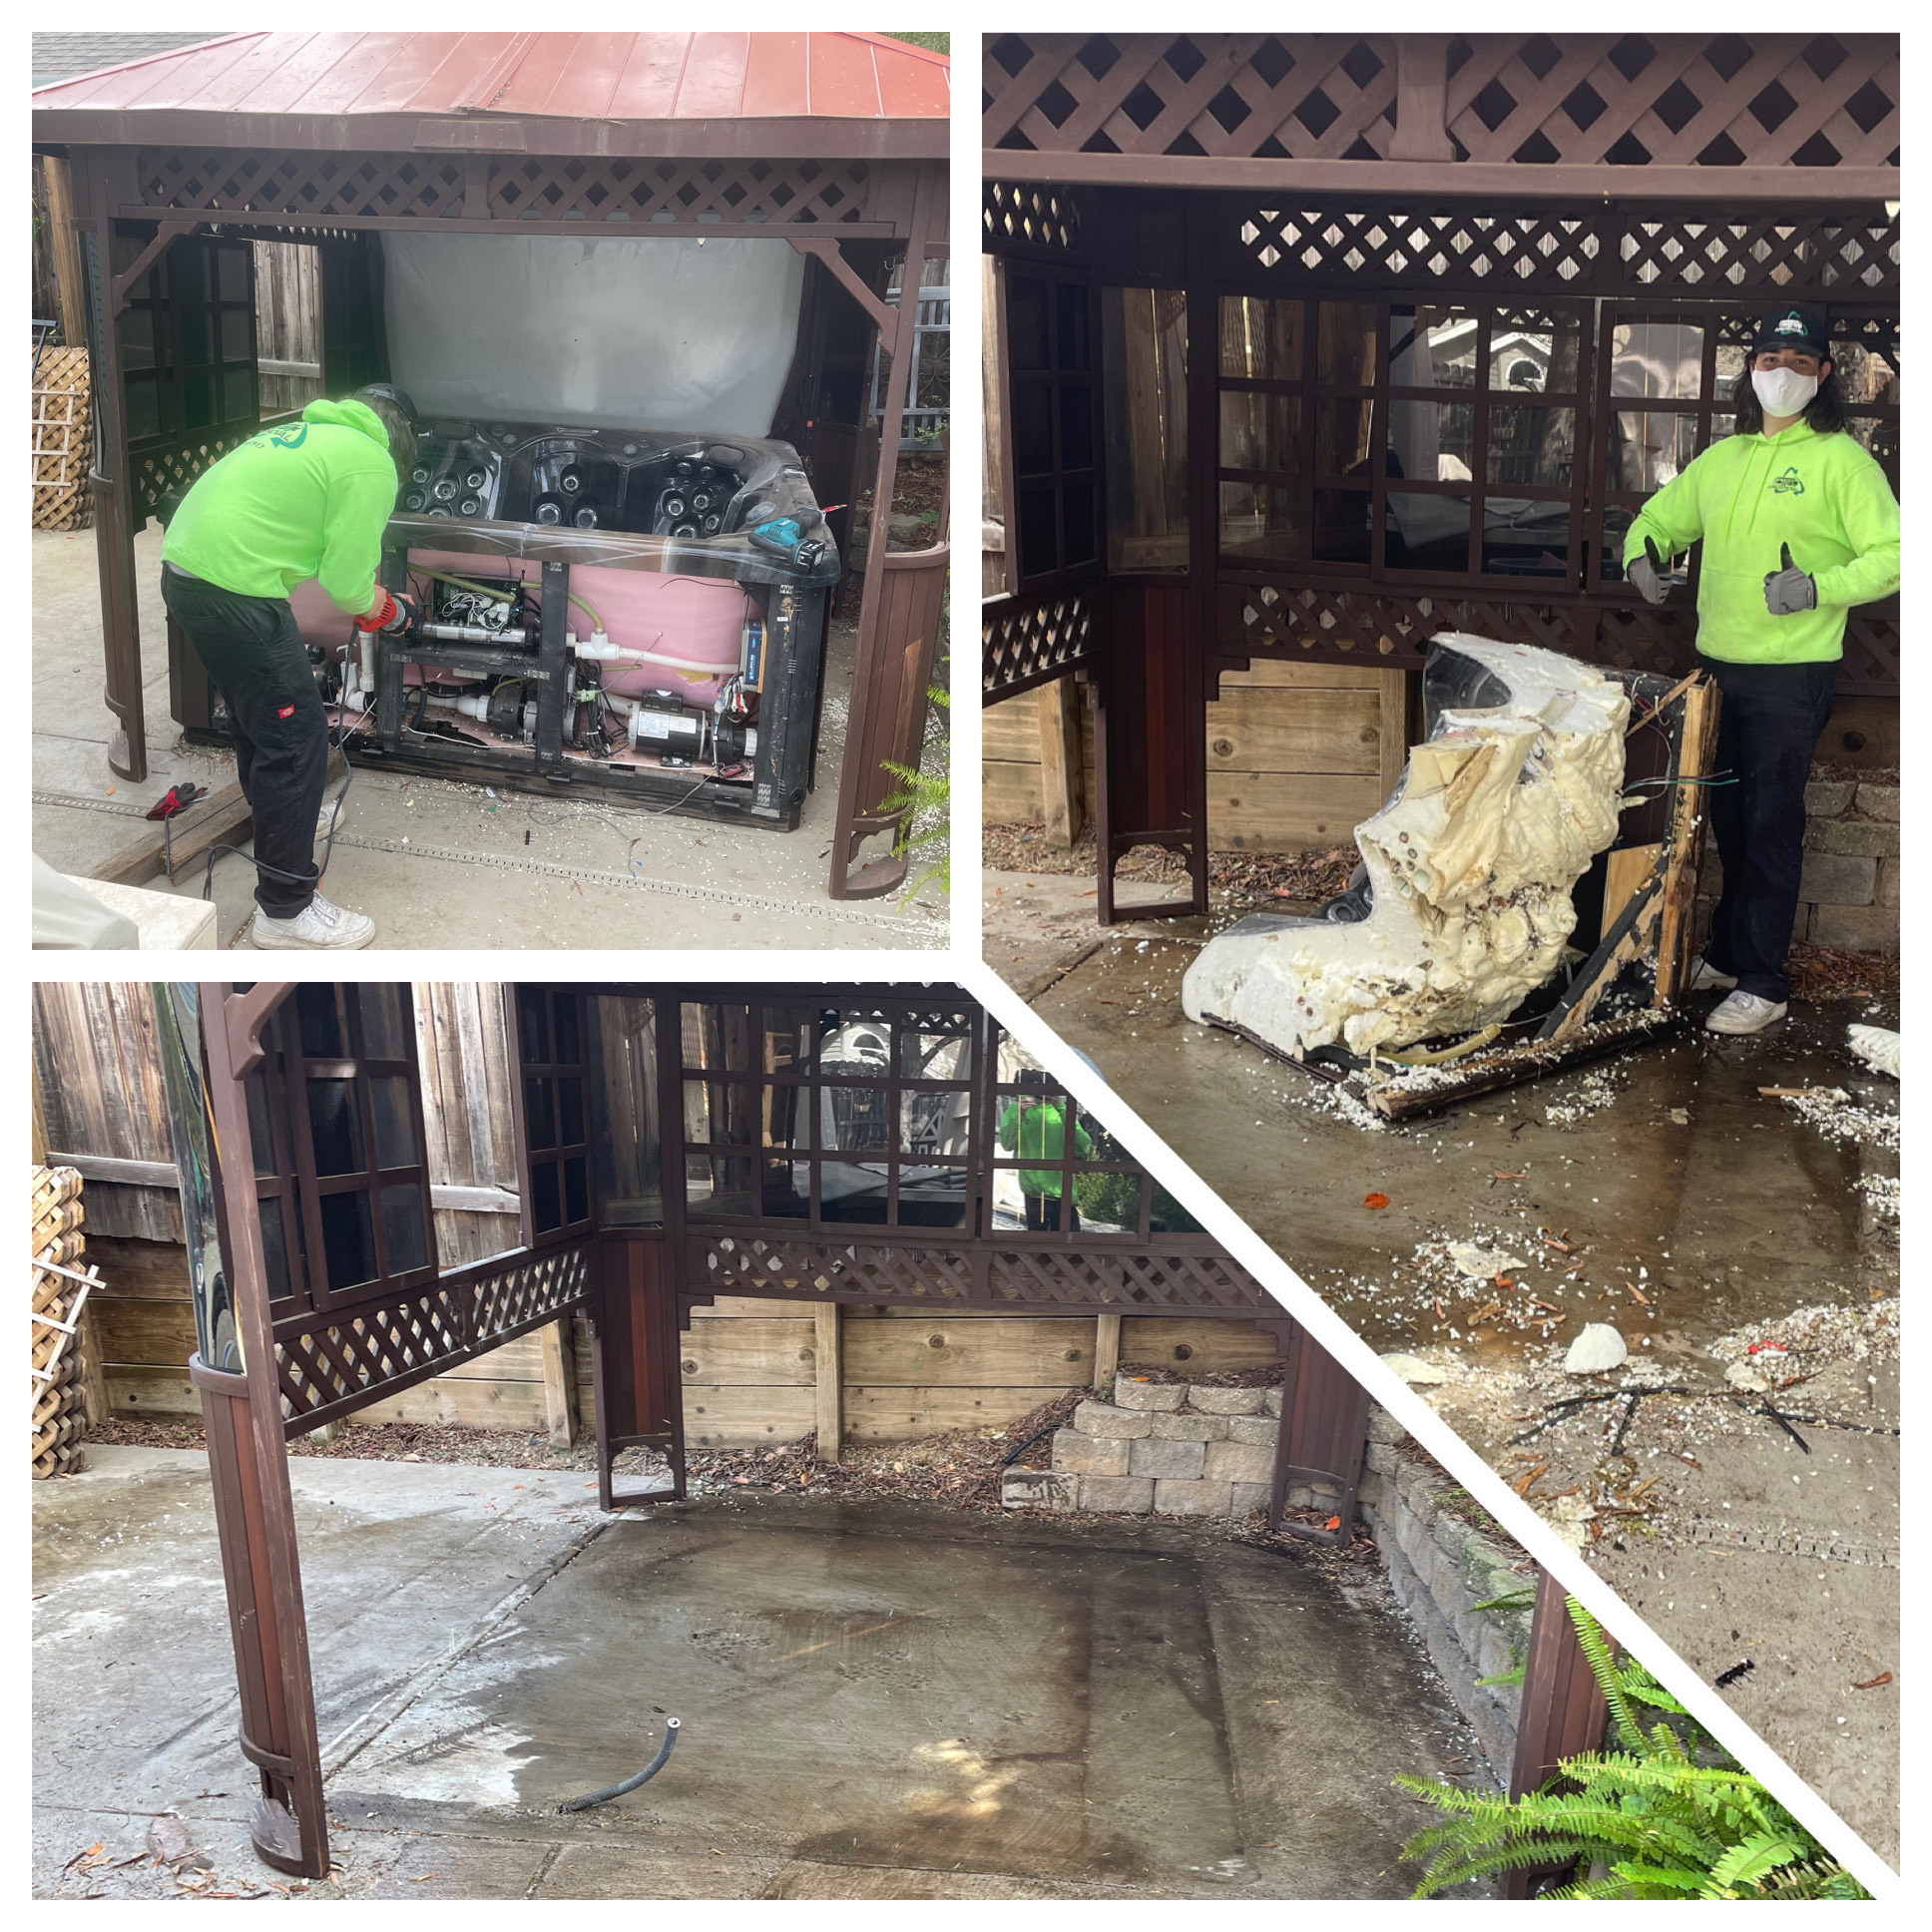 Staff working on Hot Tub for Removal by Speedy Junk Removal